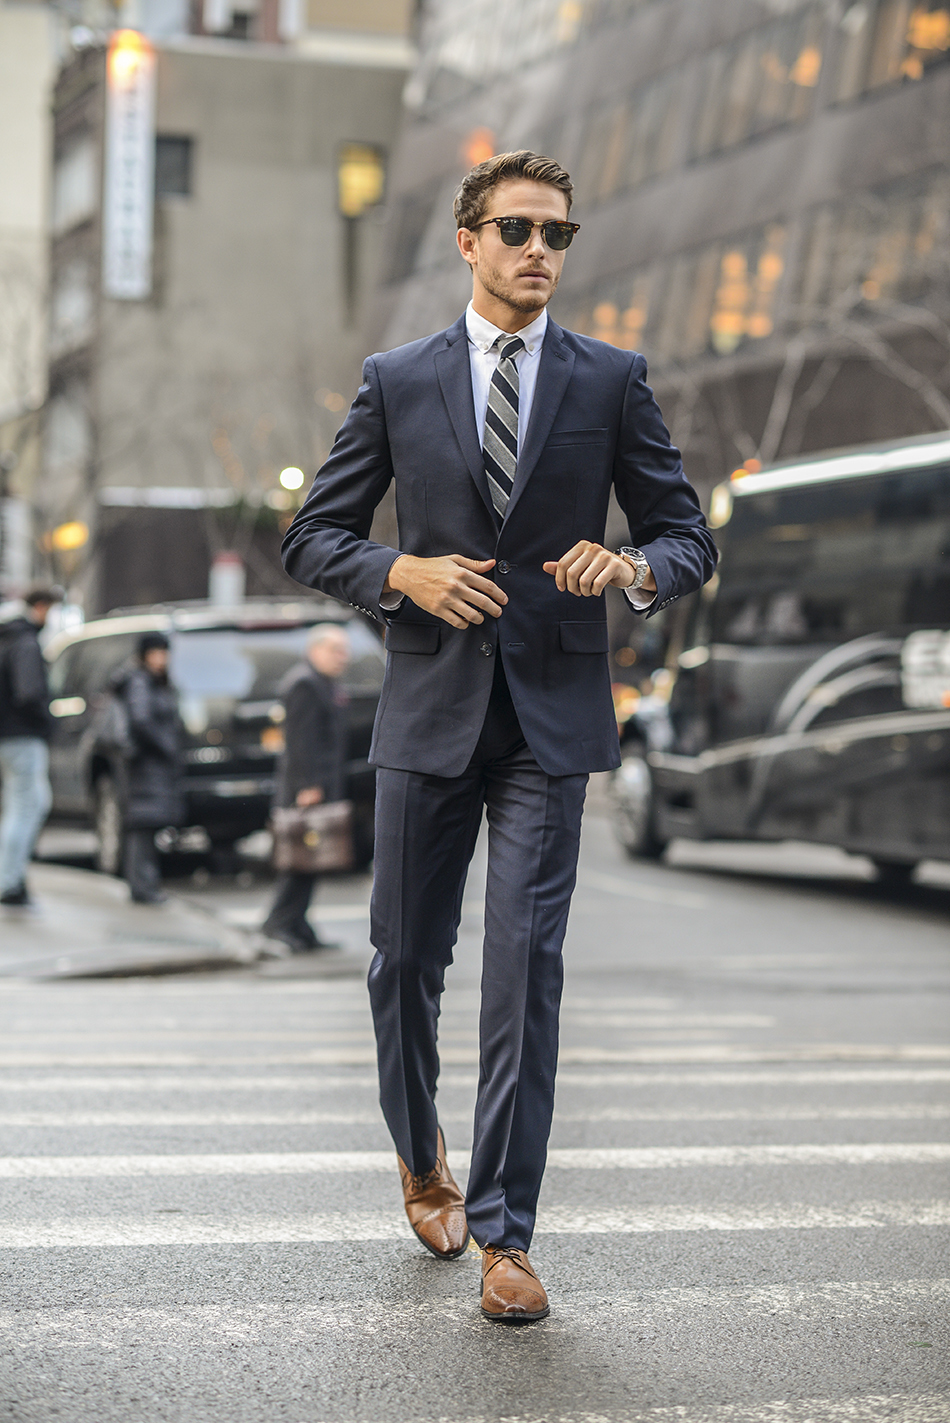 Look Good In A Suit: Everything You Need To Know : r/malefashionadvice